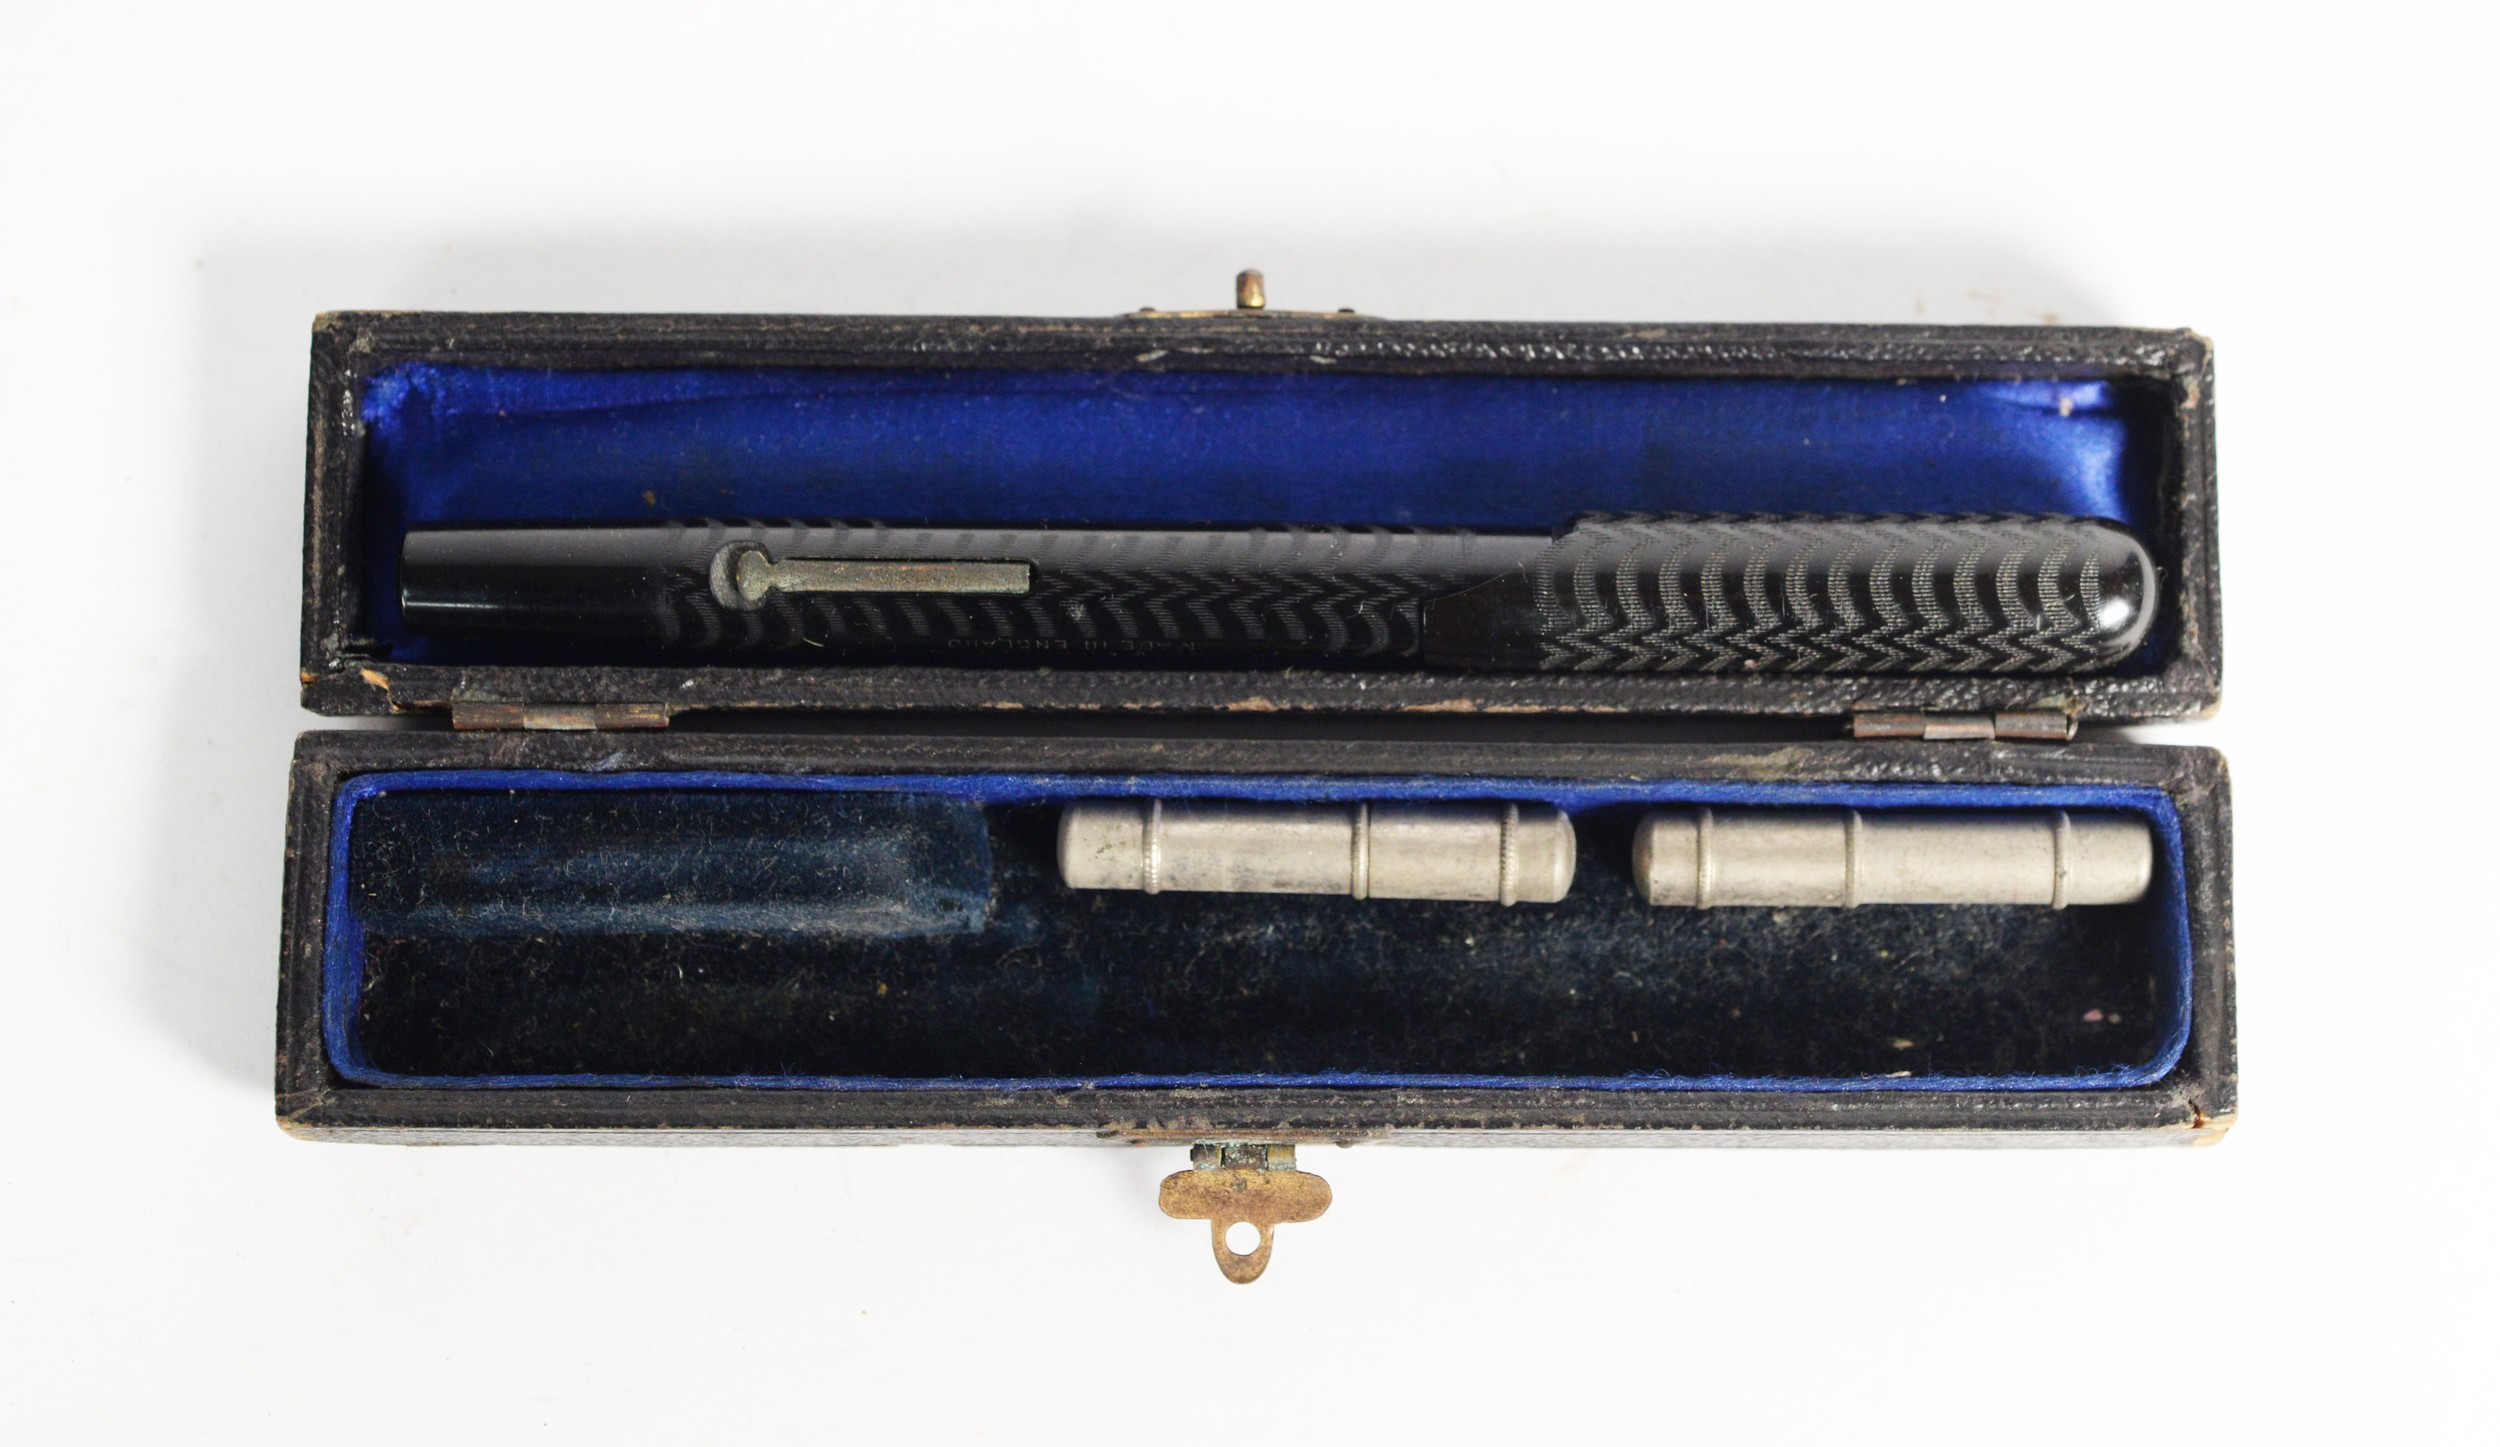 VINTAGE, THE SPHINX, SELF-FILLING FOUNTAIN PEN, lever operated, with 14k gold knib marked - Bowlers, - Image 2 of 2